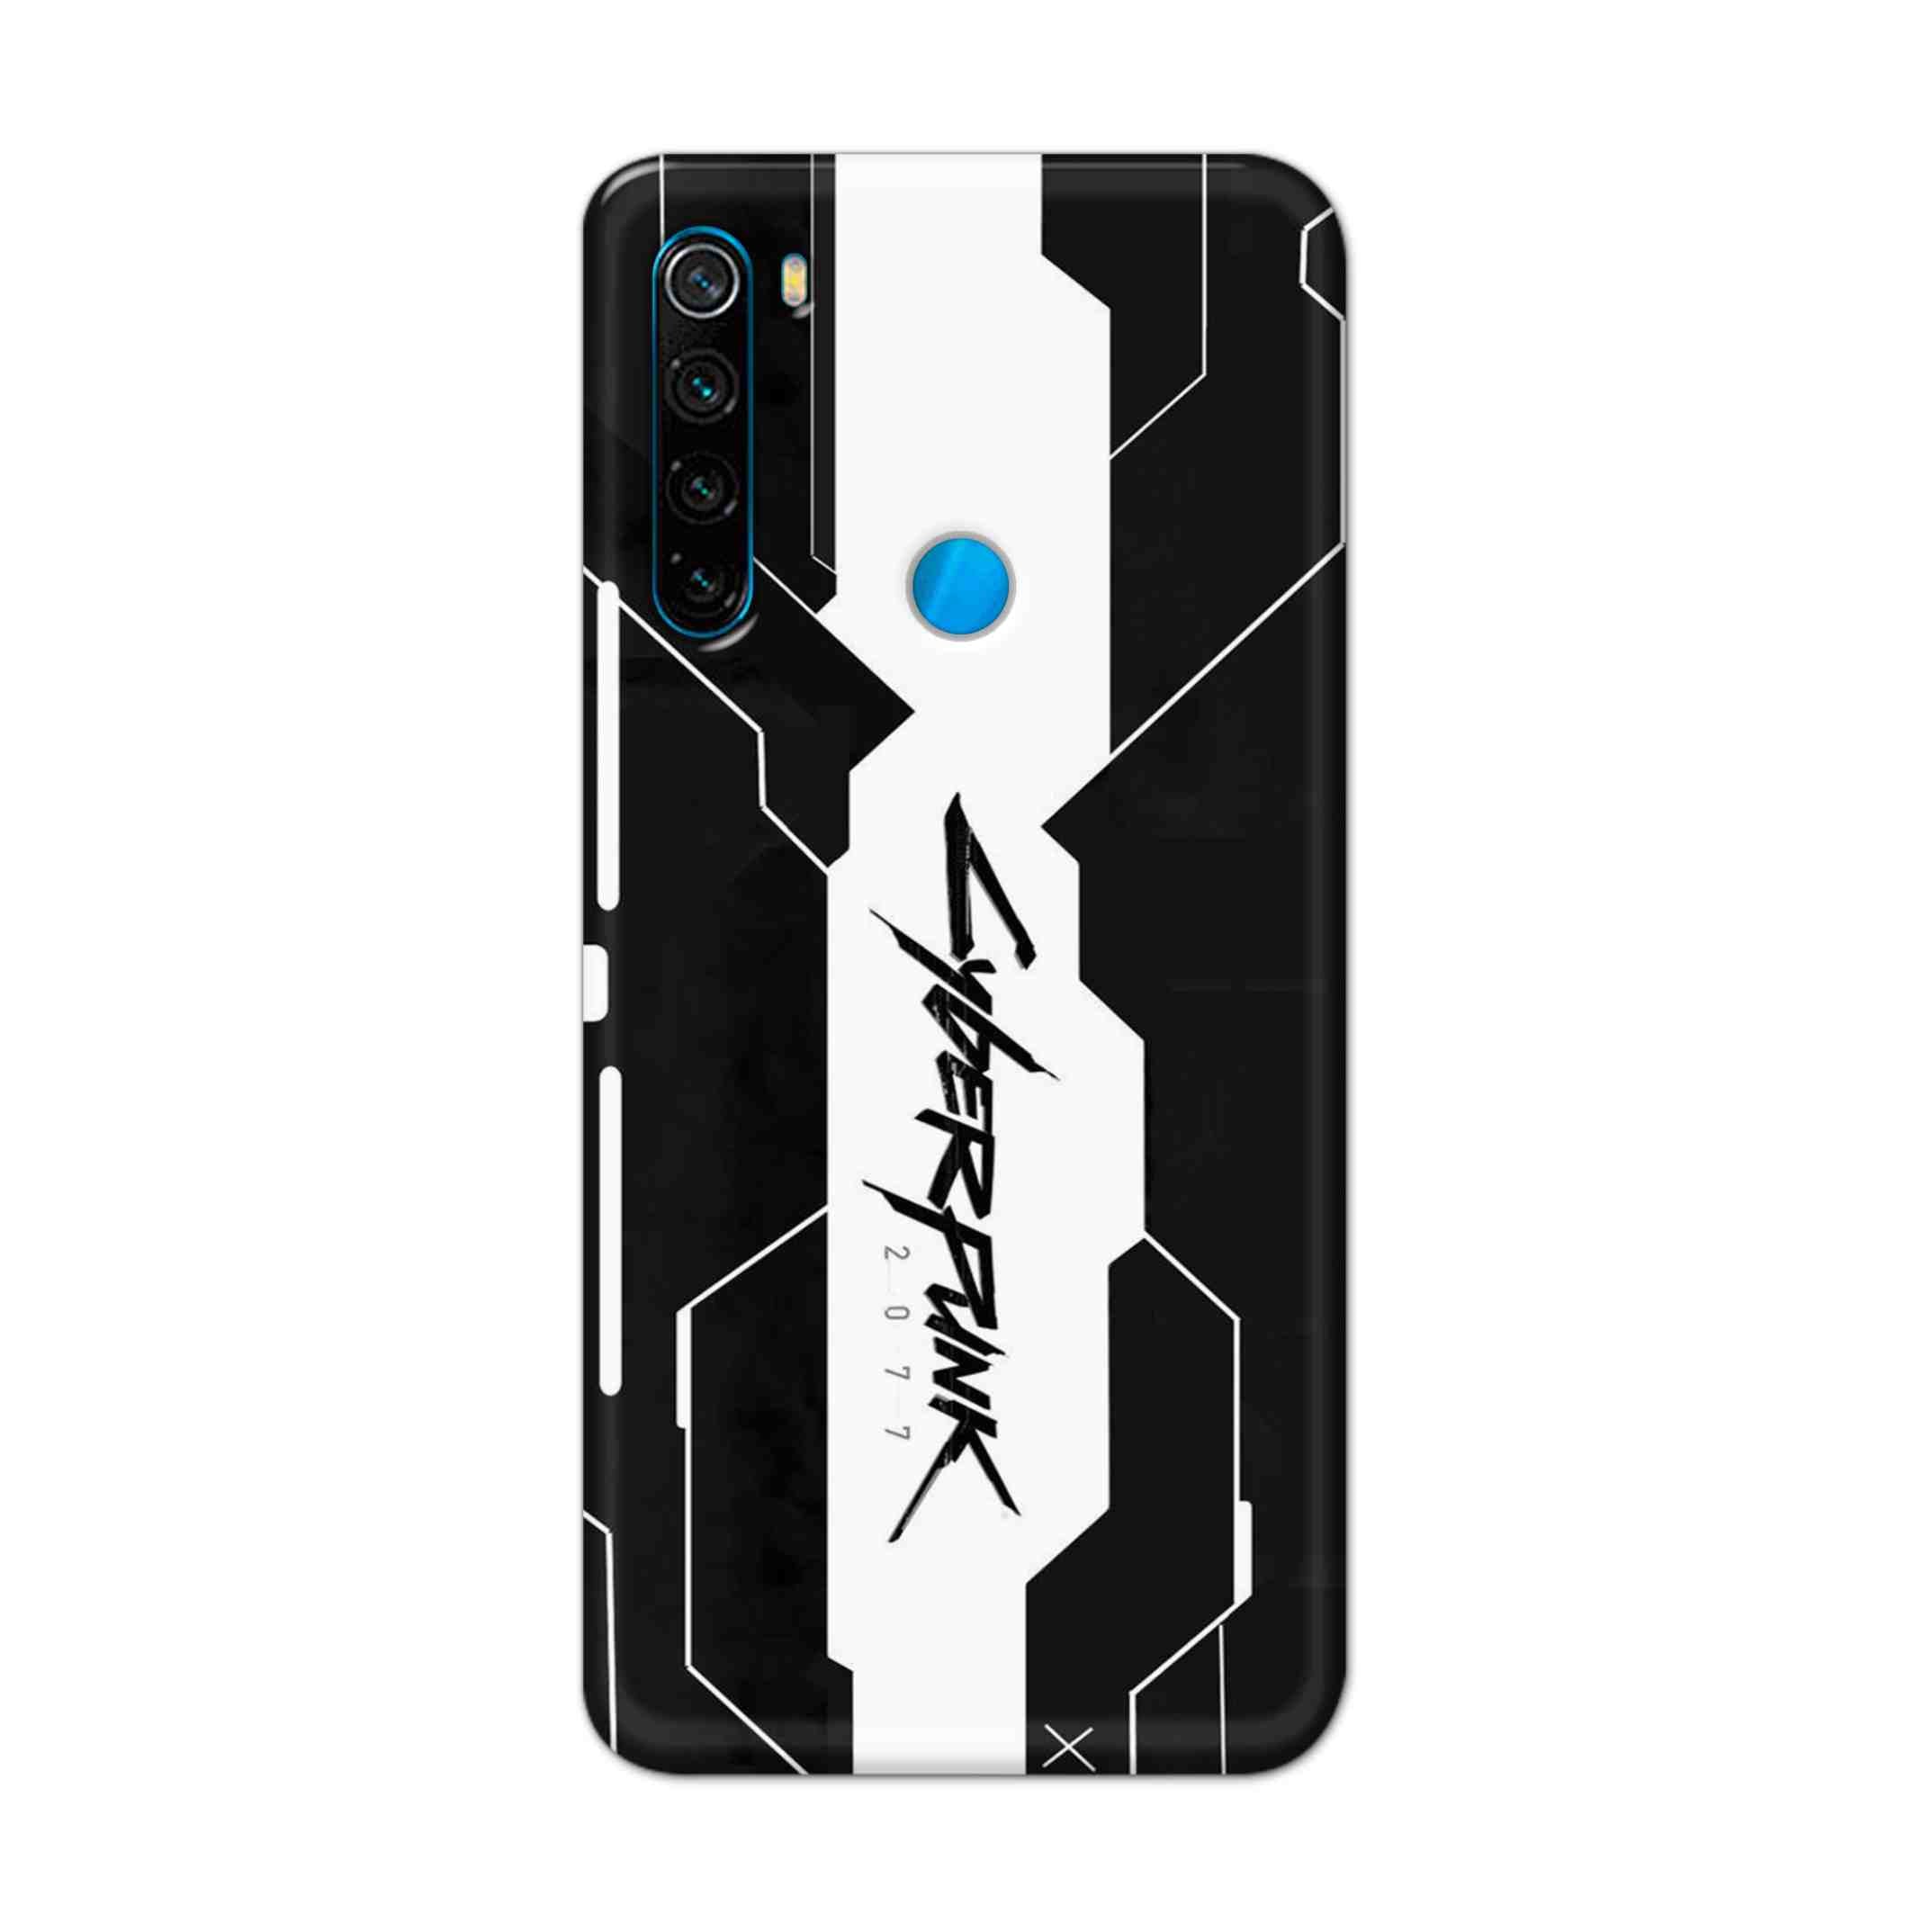 Buy Cyberpunk 2077 Art Hard Back Mobile Phone Case Cover For Xiaomi Redmi Note 8 Online